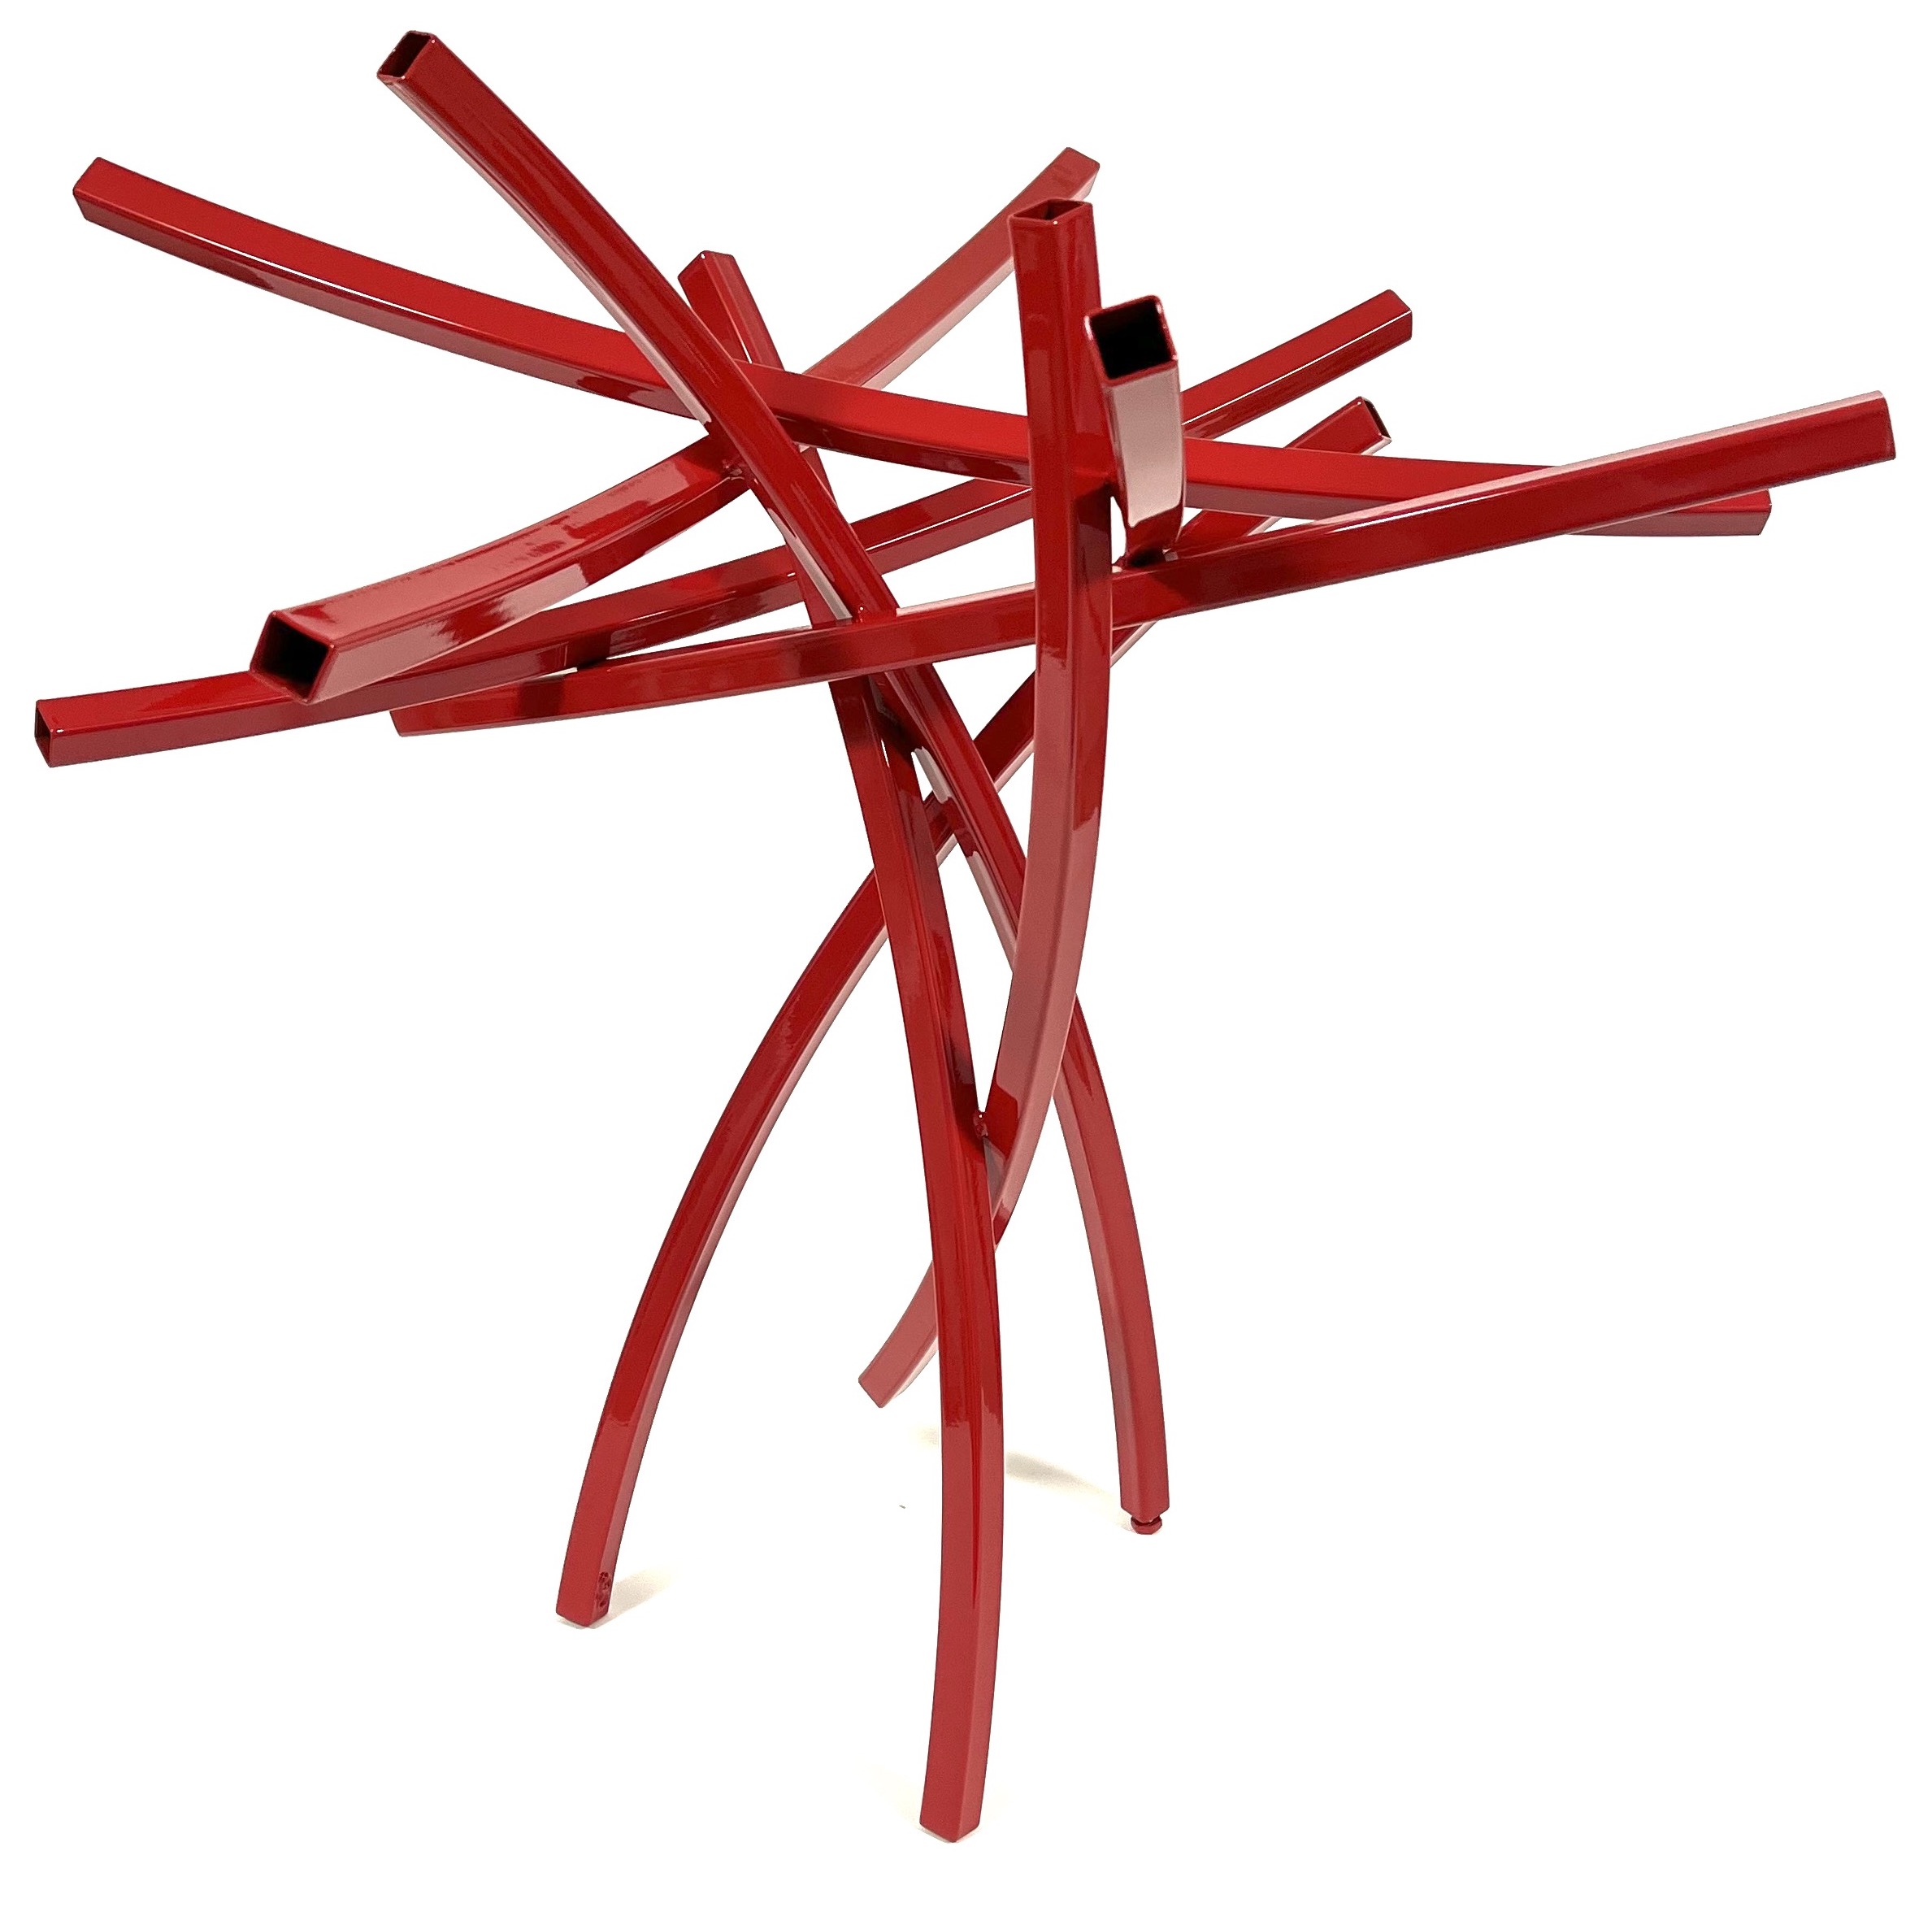 Shannon Hansen, “Commotion 8 – Red”, Metal sculpture